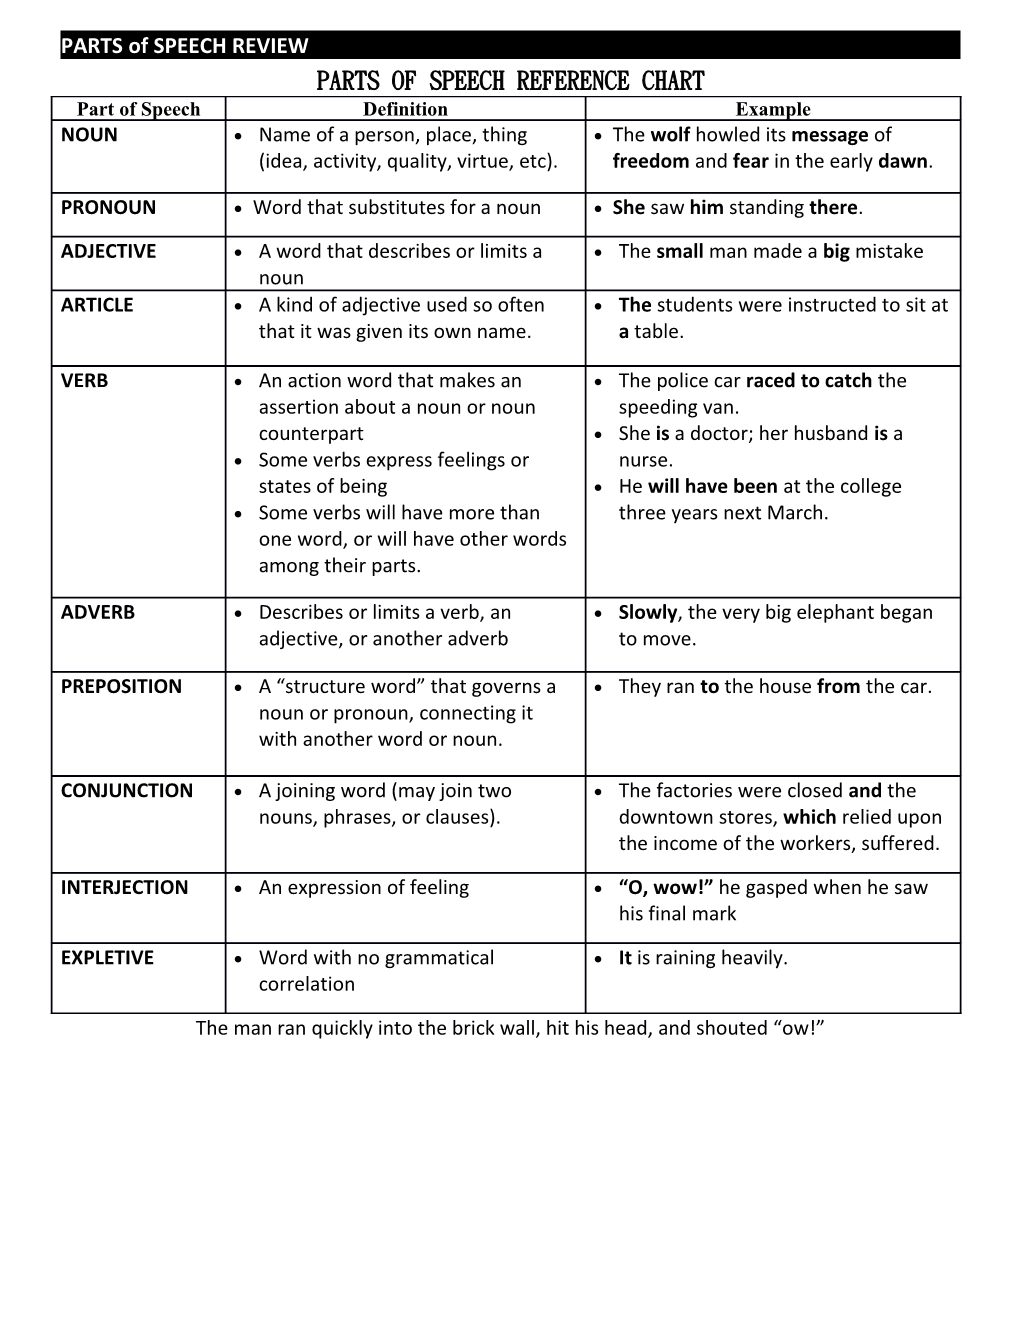 Parts of Speech Reference Chart